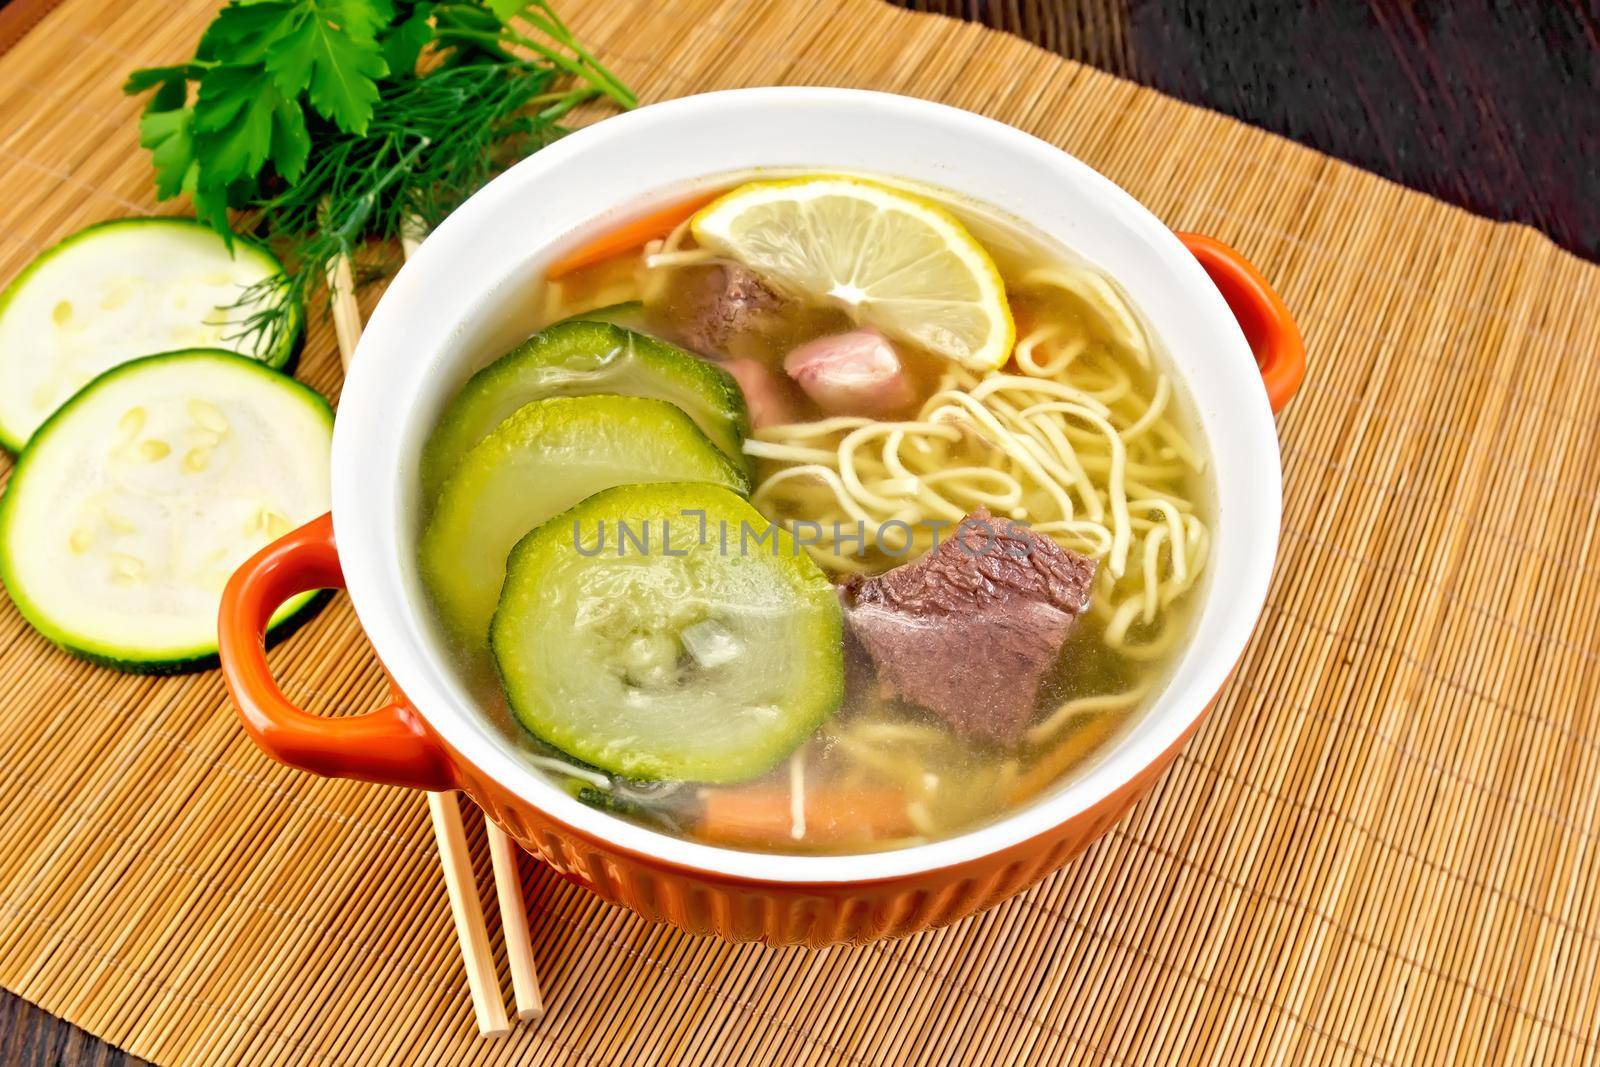 Soup with zucchini and noodles on bamboo by rezkrr